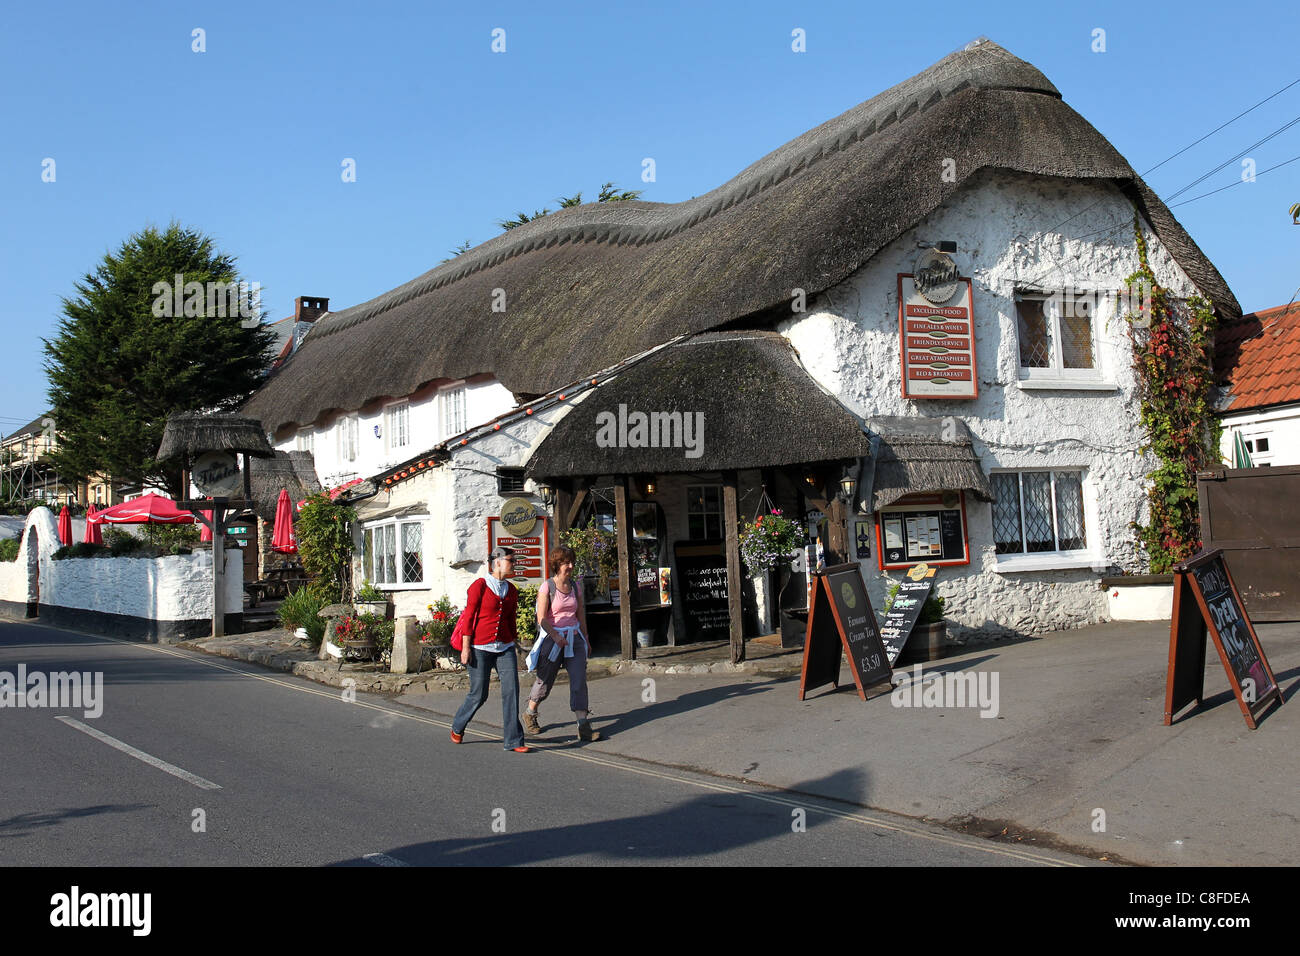 General view of The Thatch pub in Croyde, Devon, UK. Stock Photo